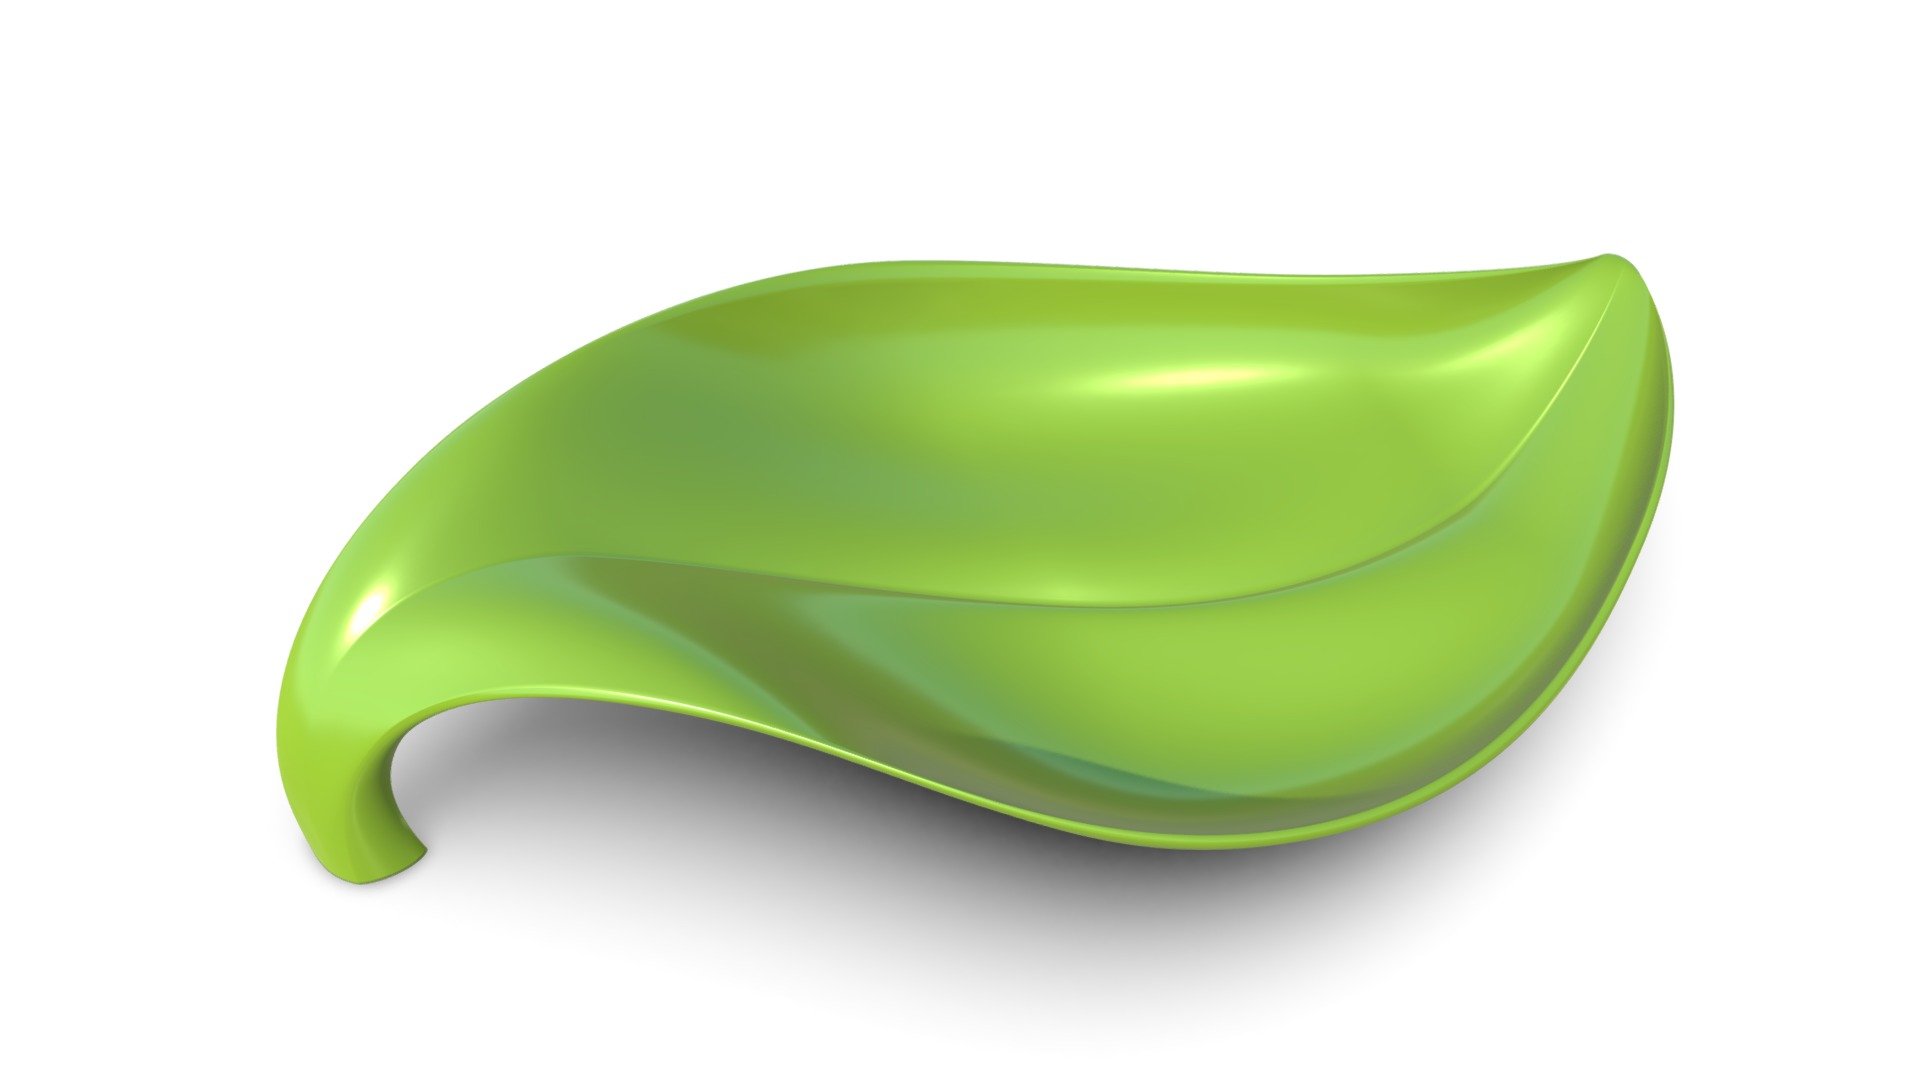 Highpoly model of tray like a leaf. Ready for 3d-print. Copy from photo. Size: 210 x 108 x 39 mm. Volume: 39.62 cm3 3d model